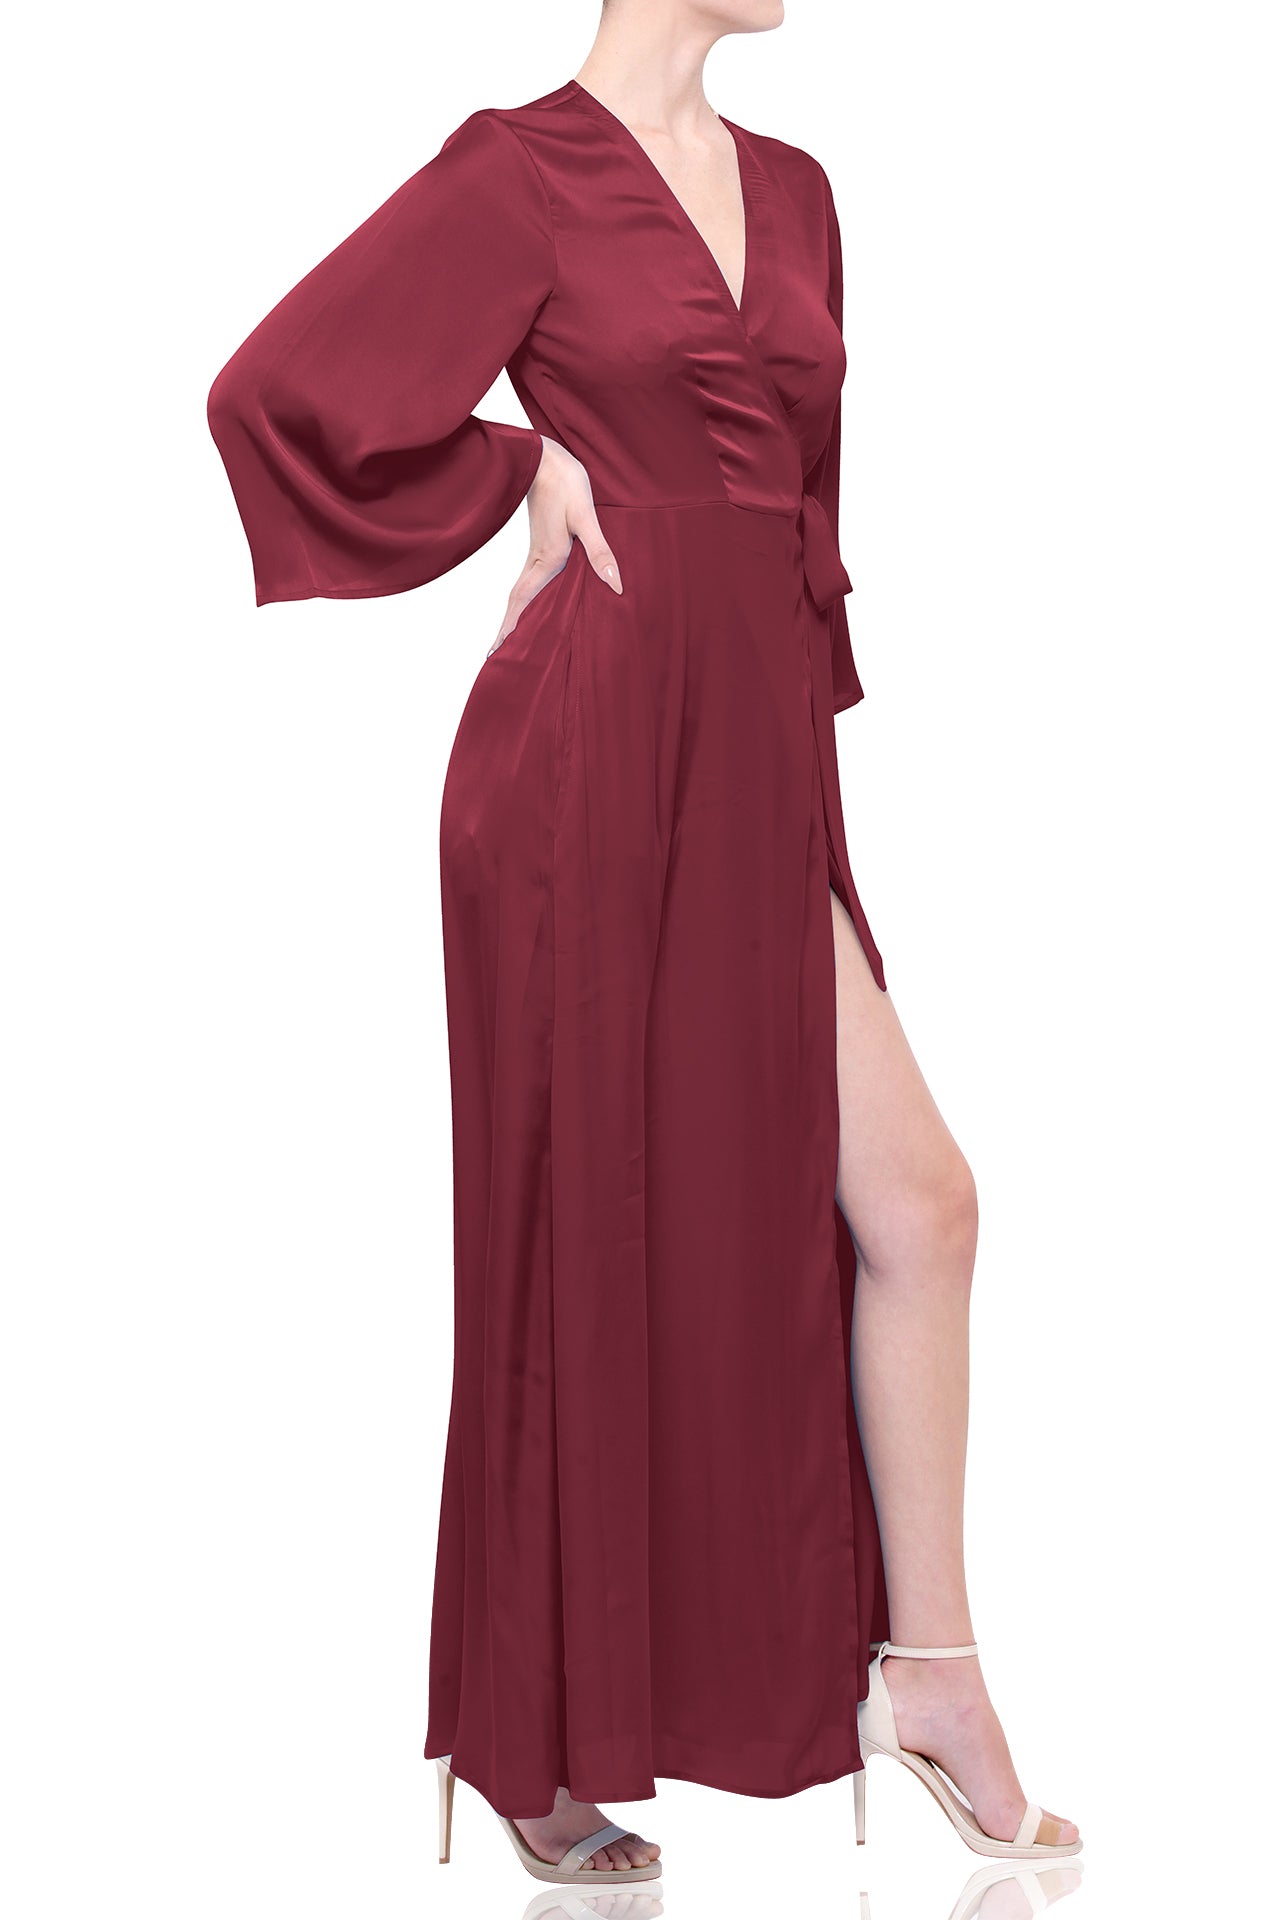 Solid Blood Stone Maxi Long Wrap Dress